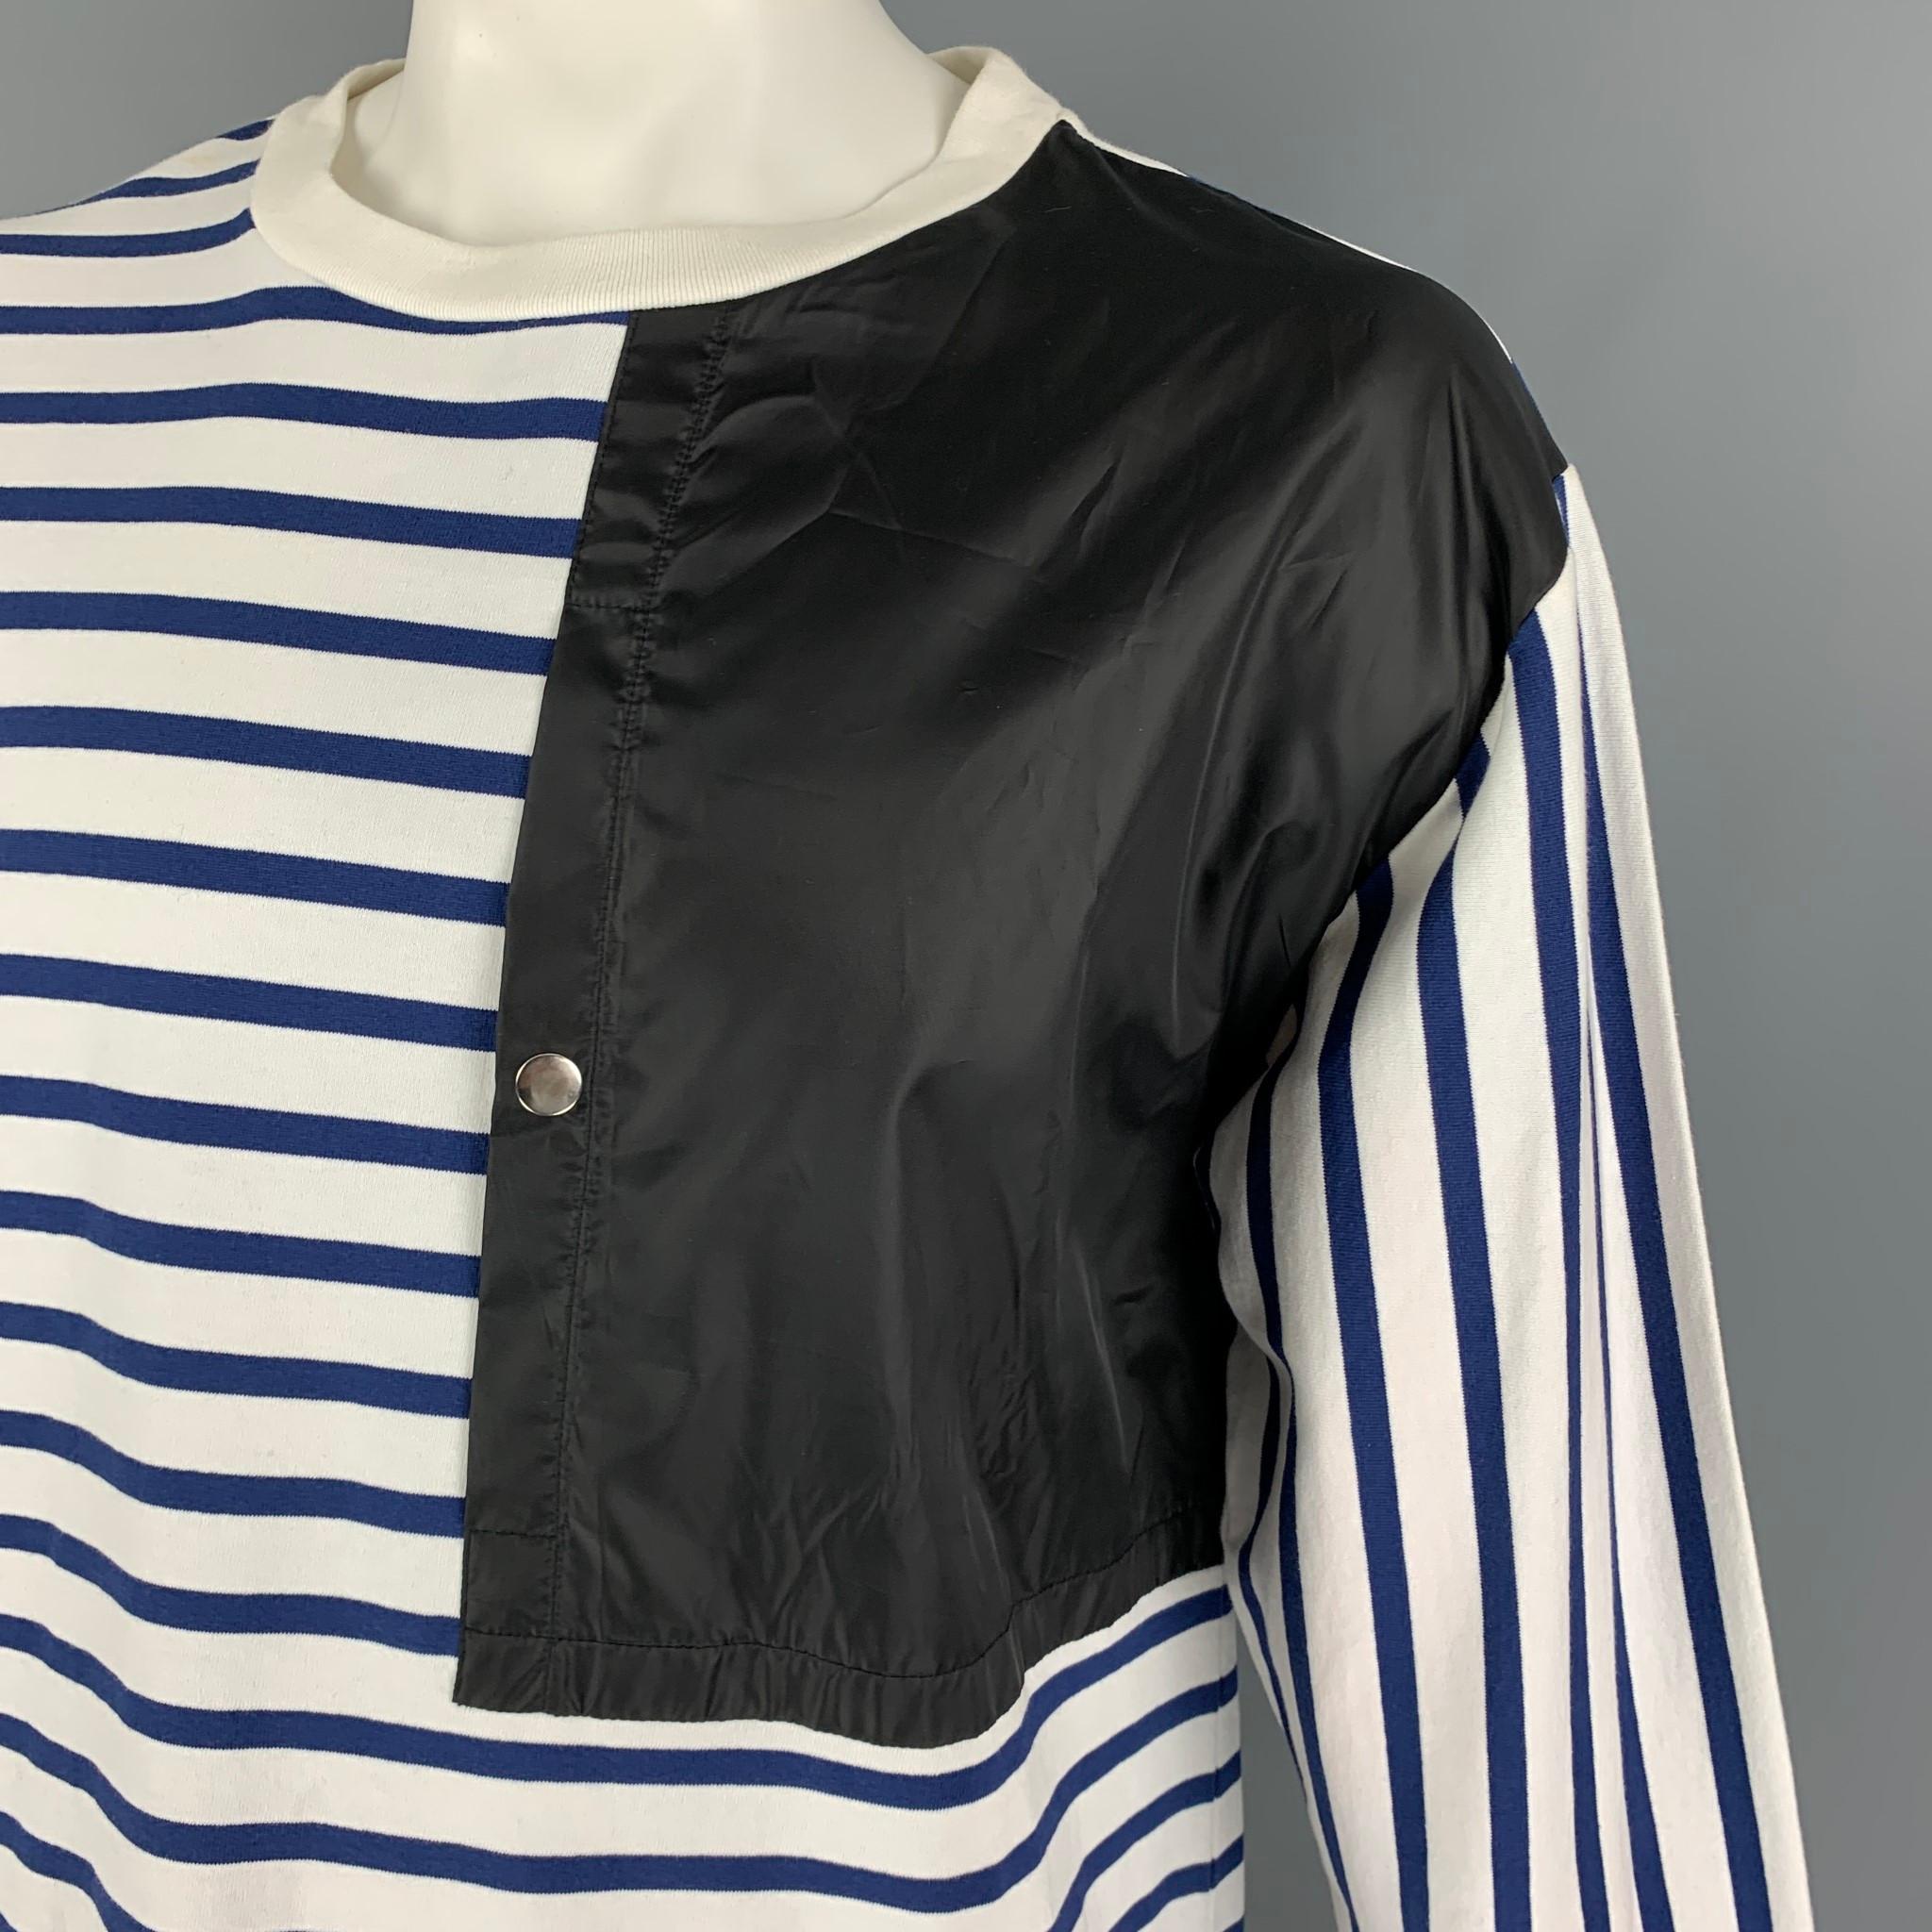 PUBLIC SCHOOL T-shirt comes in a white & blue stripe cotton featuring a elastic hem, black pouch pocket, and a crew-neck. 

Very Good Pre-Owned Condition.
Marked: XL

Measurements:

Shoulder: 22 in.
Chest: 48 in.
Sleeve: 26.5 in.
Length: 29.5 in.